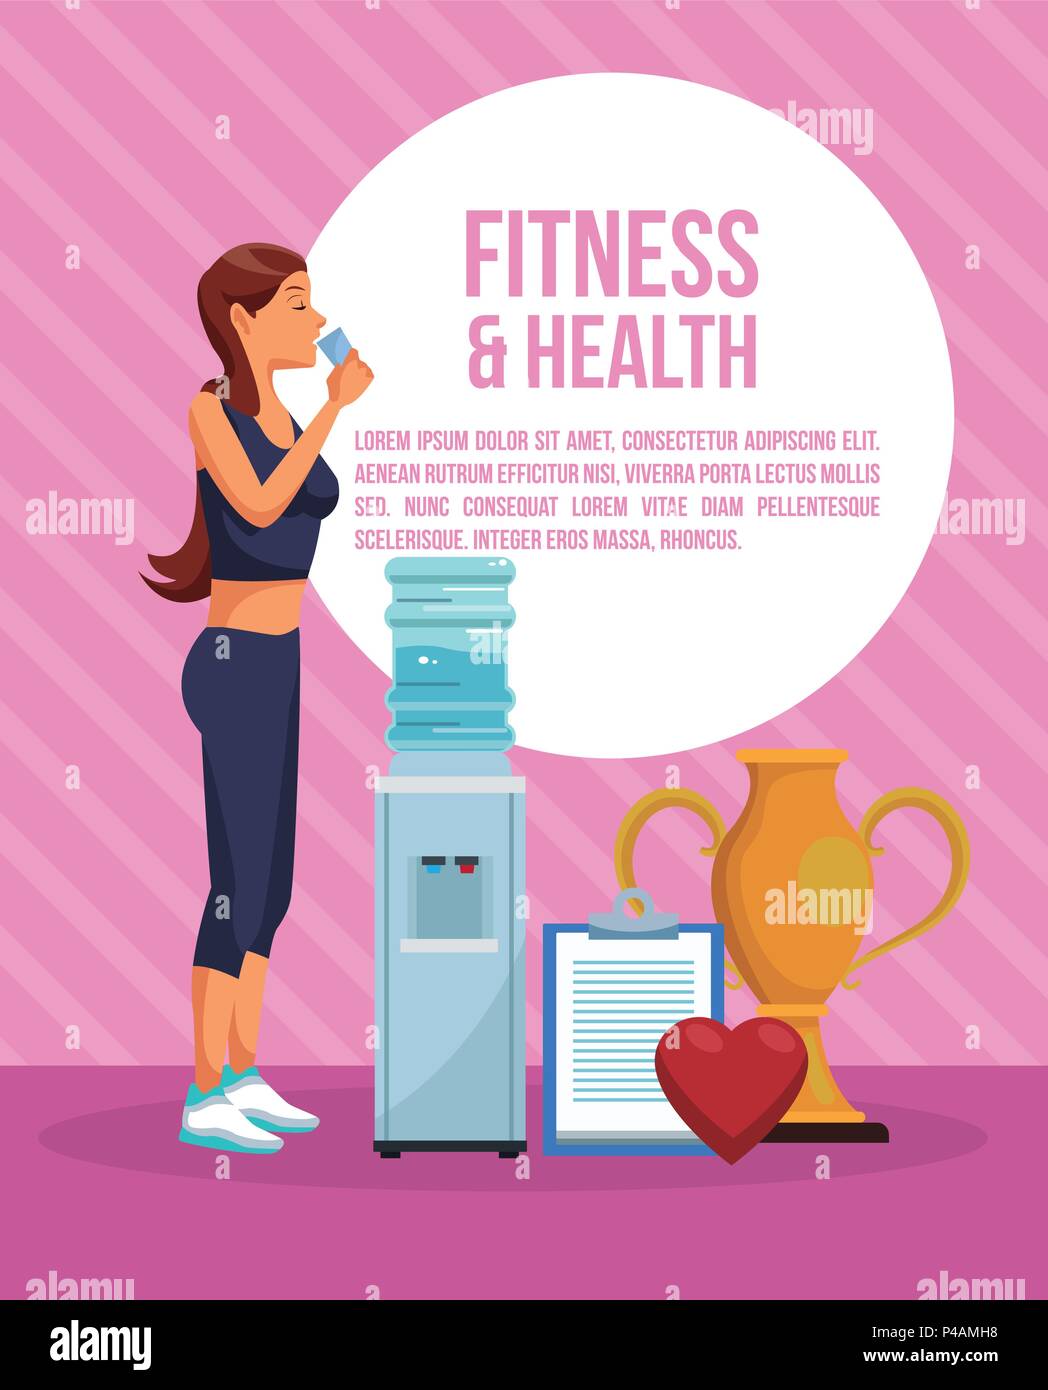 Fitness and health infographic Stock Vector